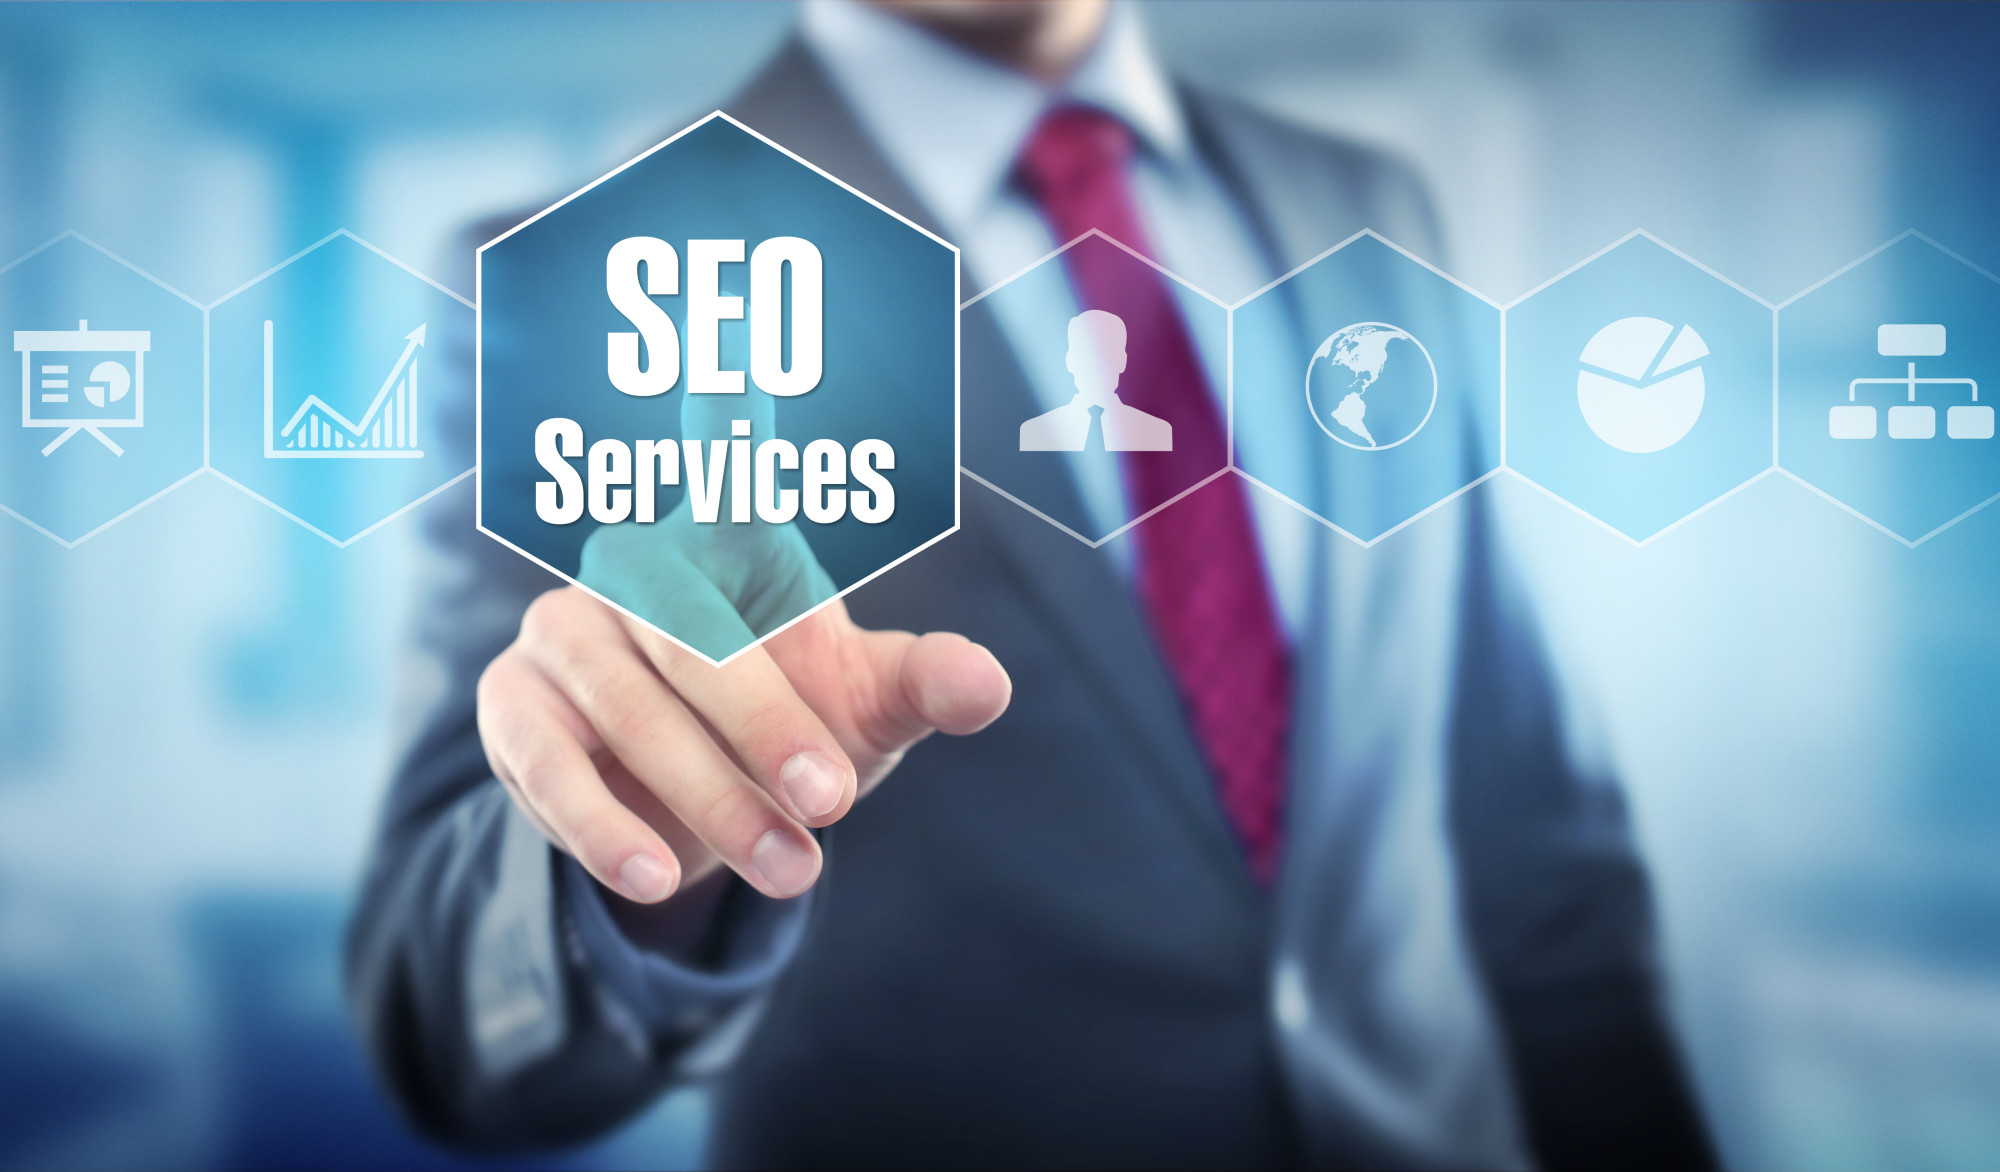 4 Tips for Choosing the Best Local SEO Services | WebConfs.com